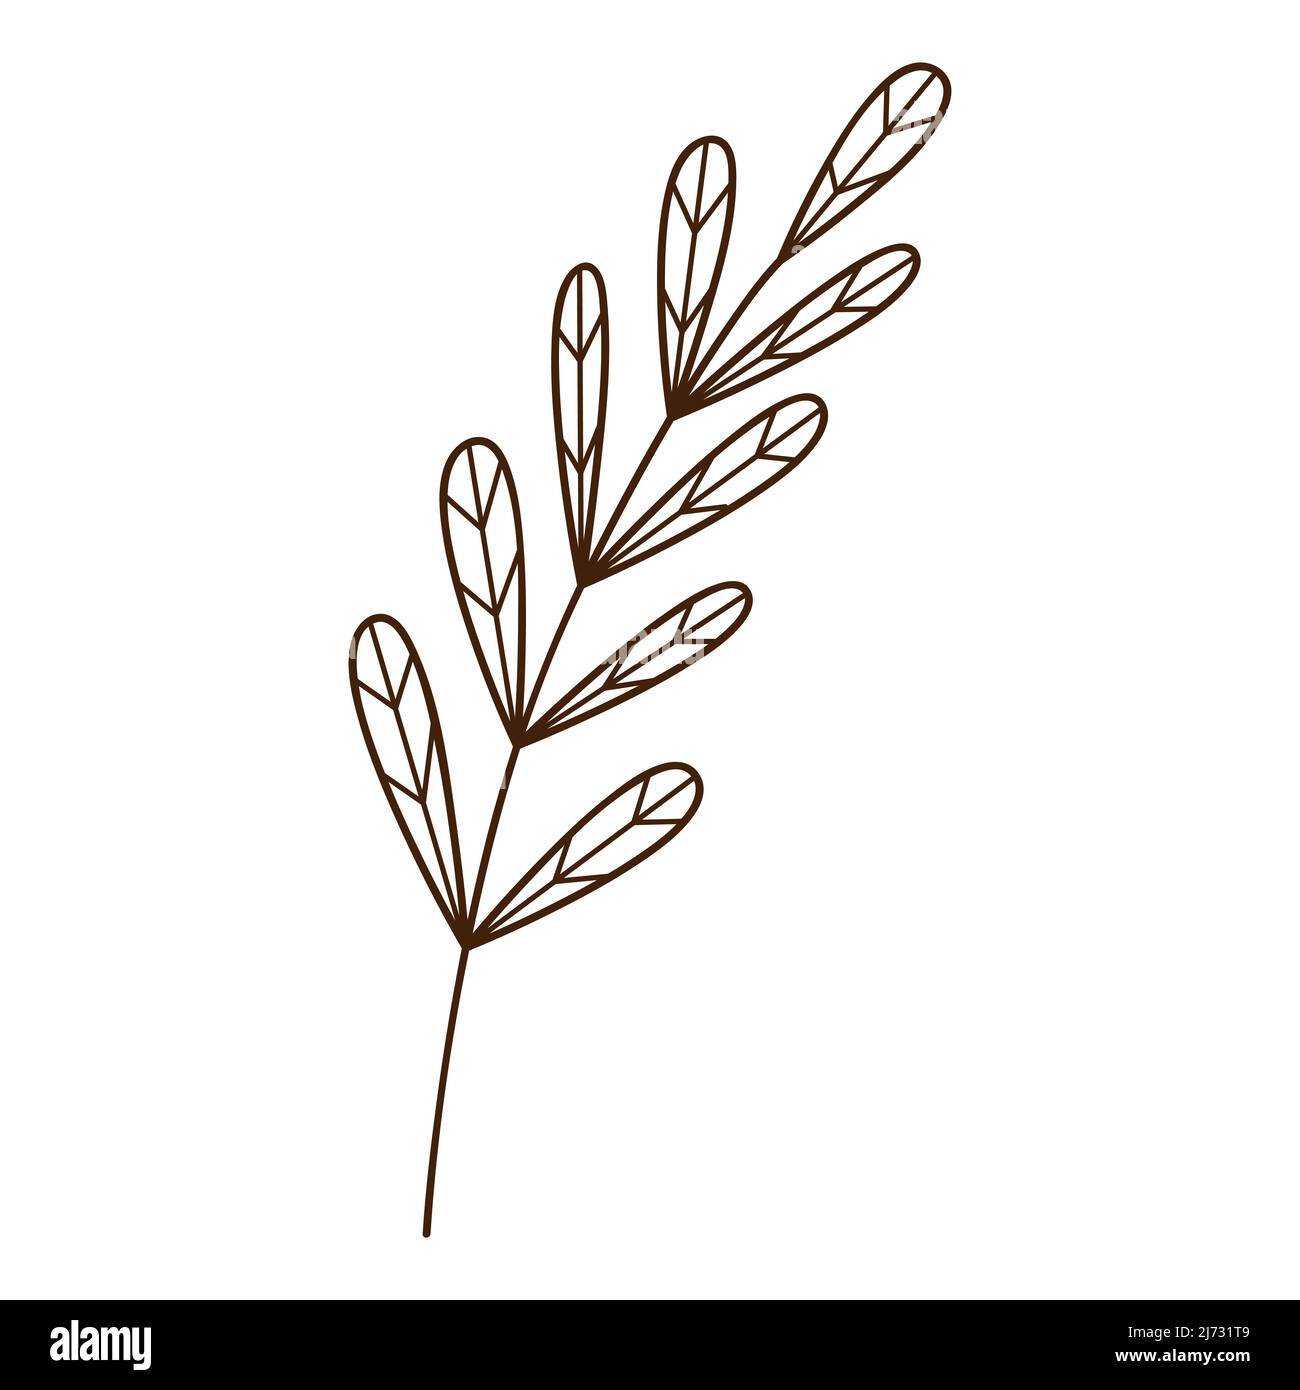 Abstract twig with leaves. A blade of grass. Autumn time. Botanical, plant design element with outline. Doodle, hand-drawn. Flat design. Black white v Stock Vector